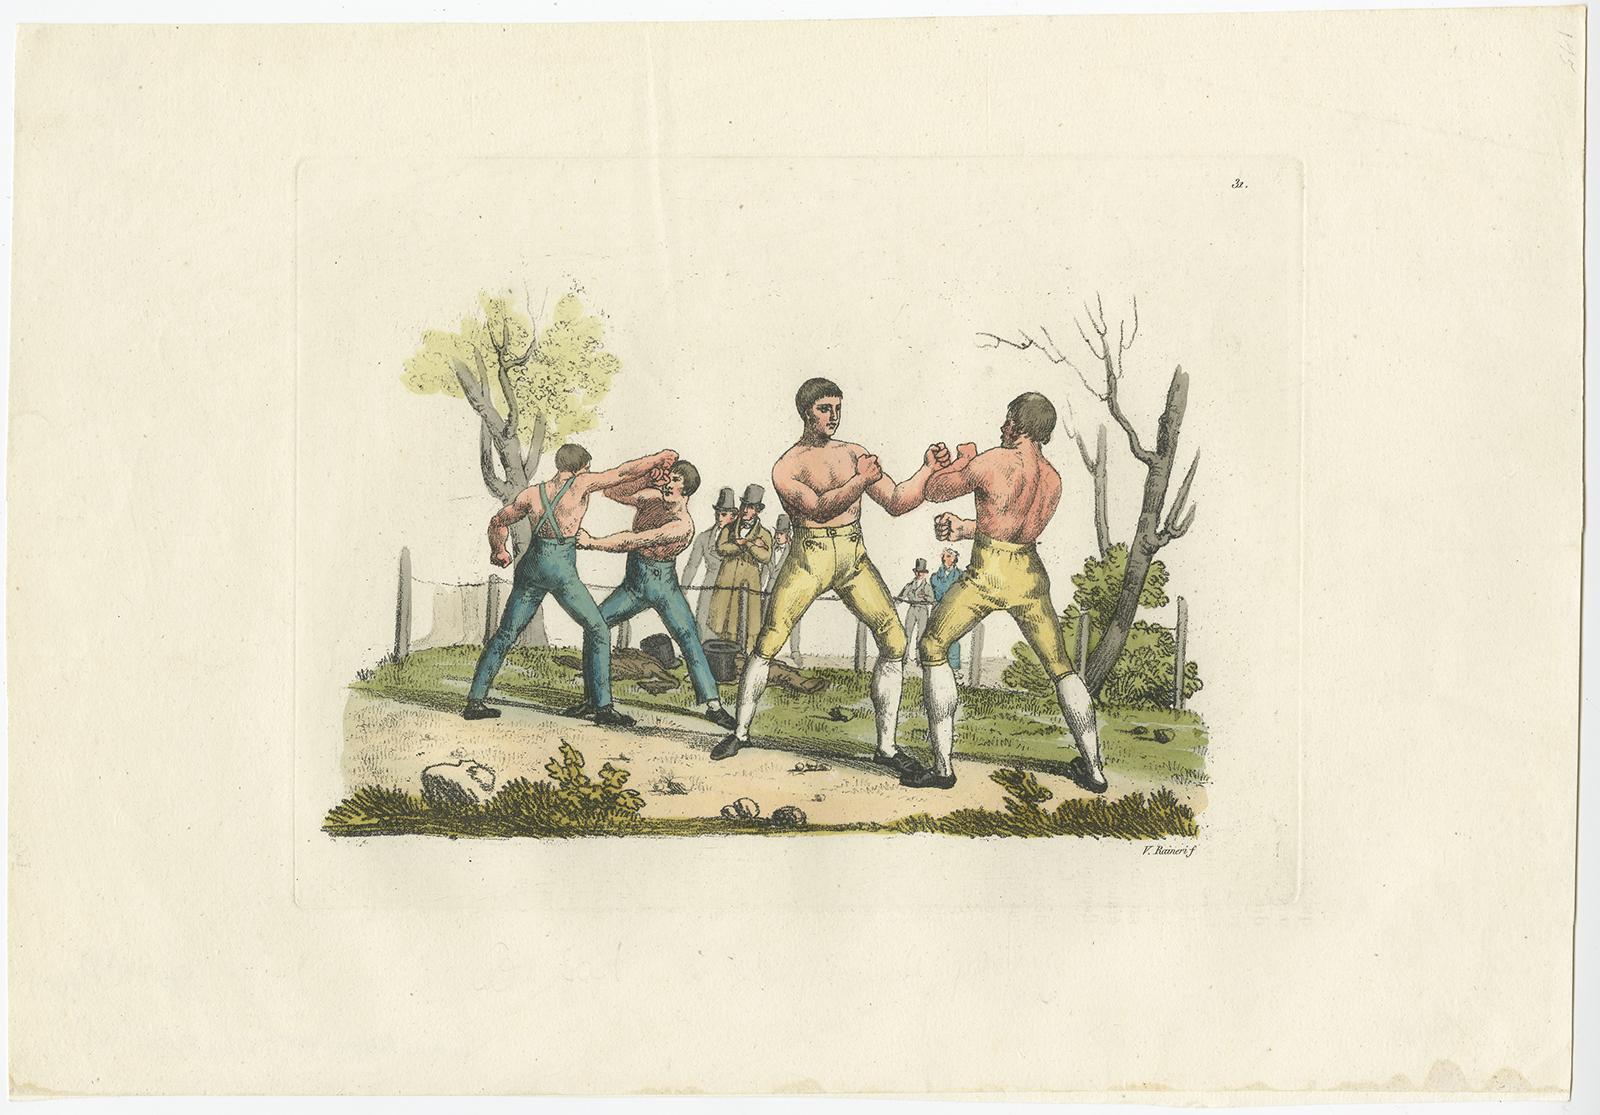 Untitled print depicting boxing men in England. This print originates from 'Costume Antico e Moderno' by Giulio Ferrario, published in Milan, 1819.